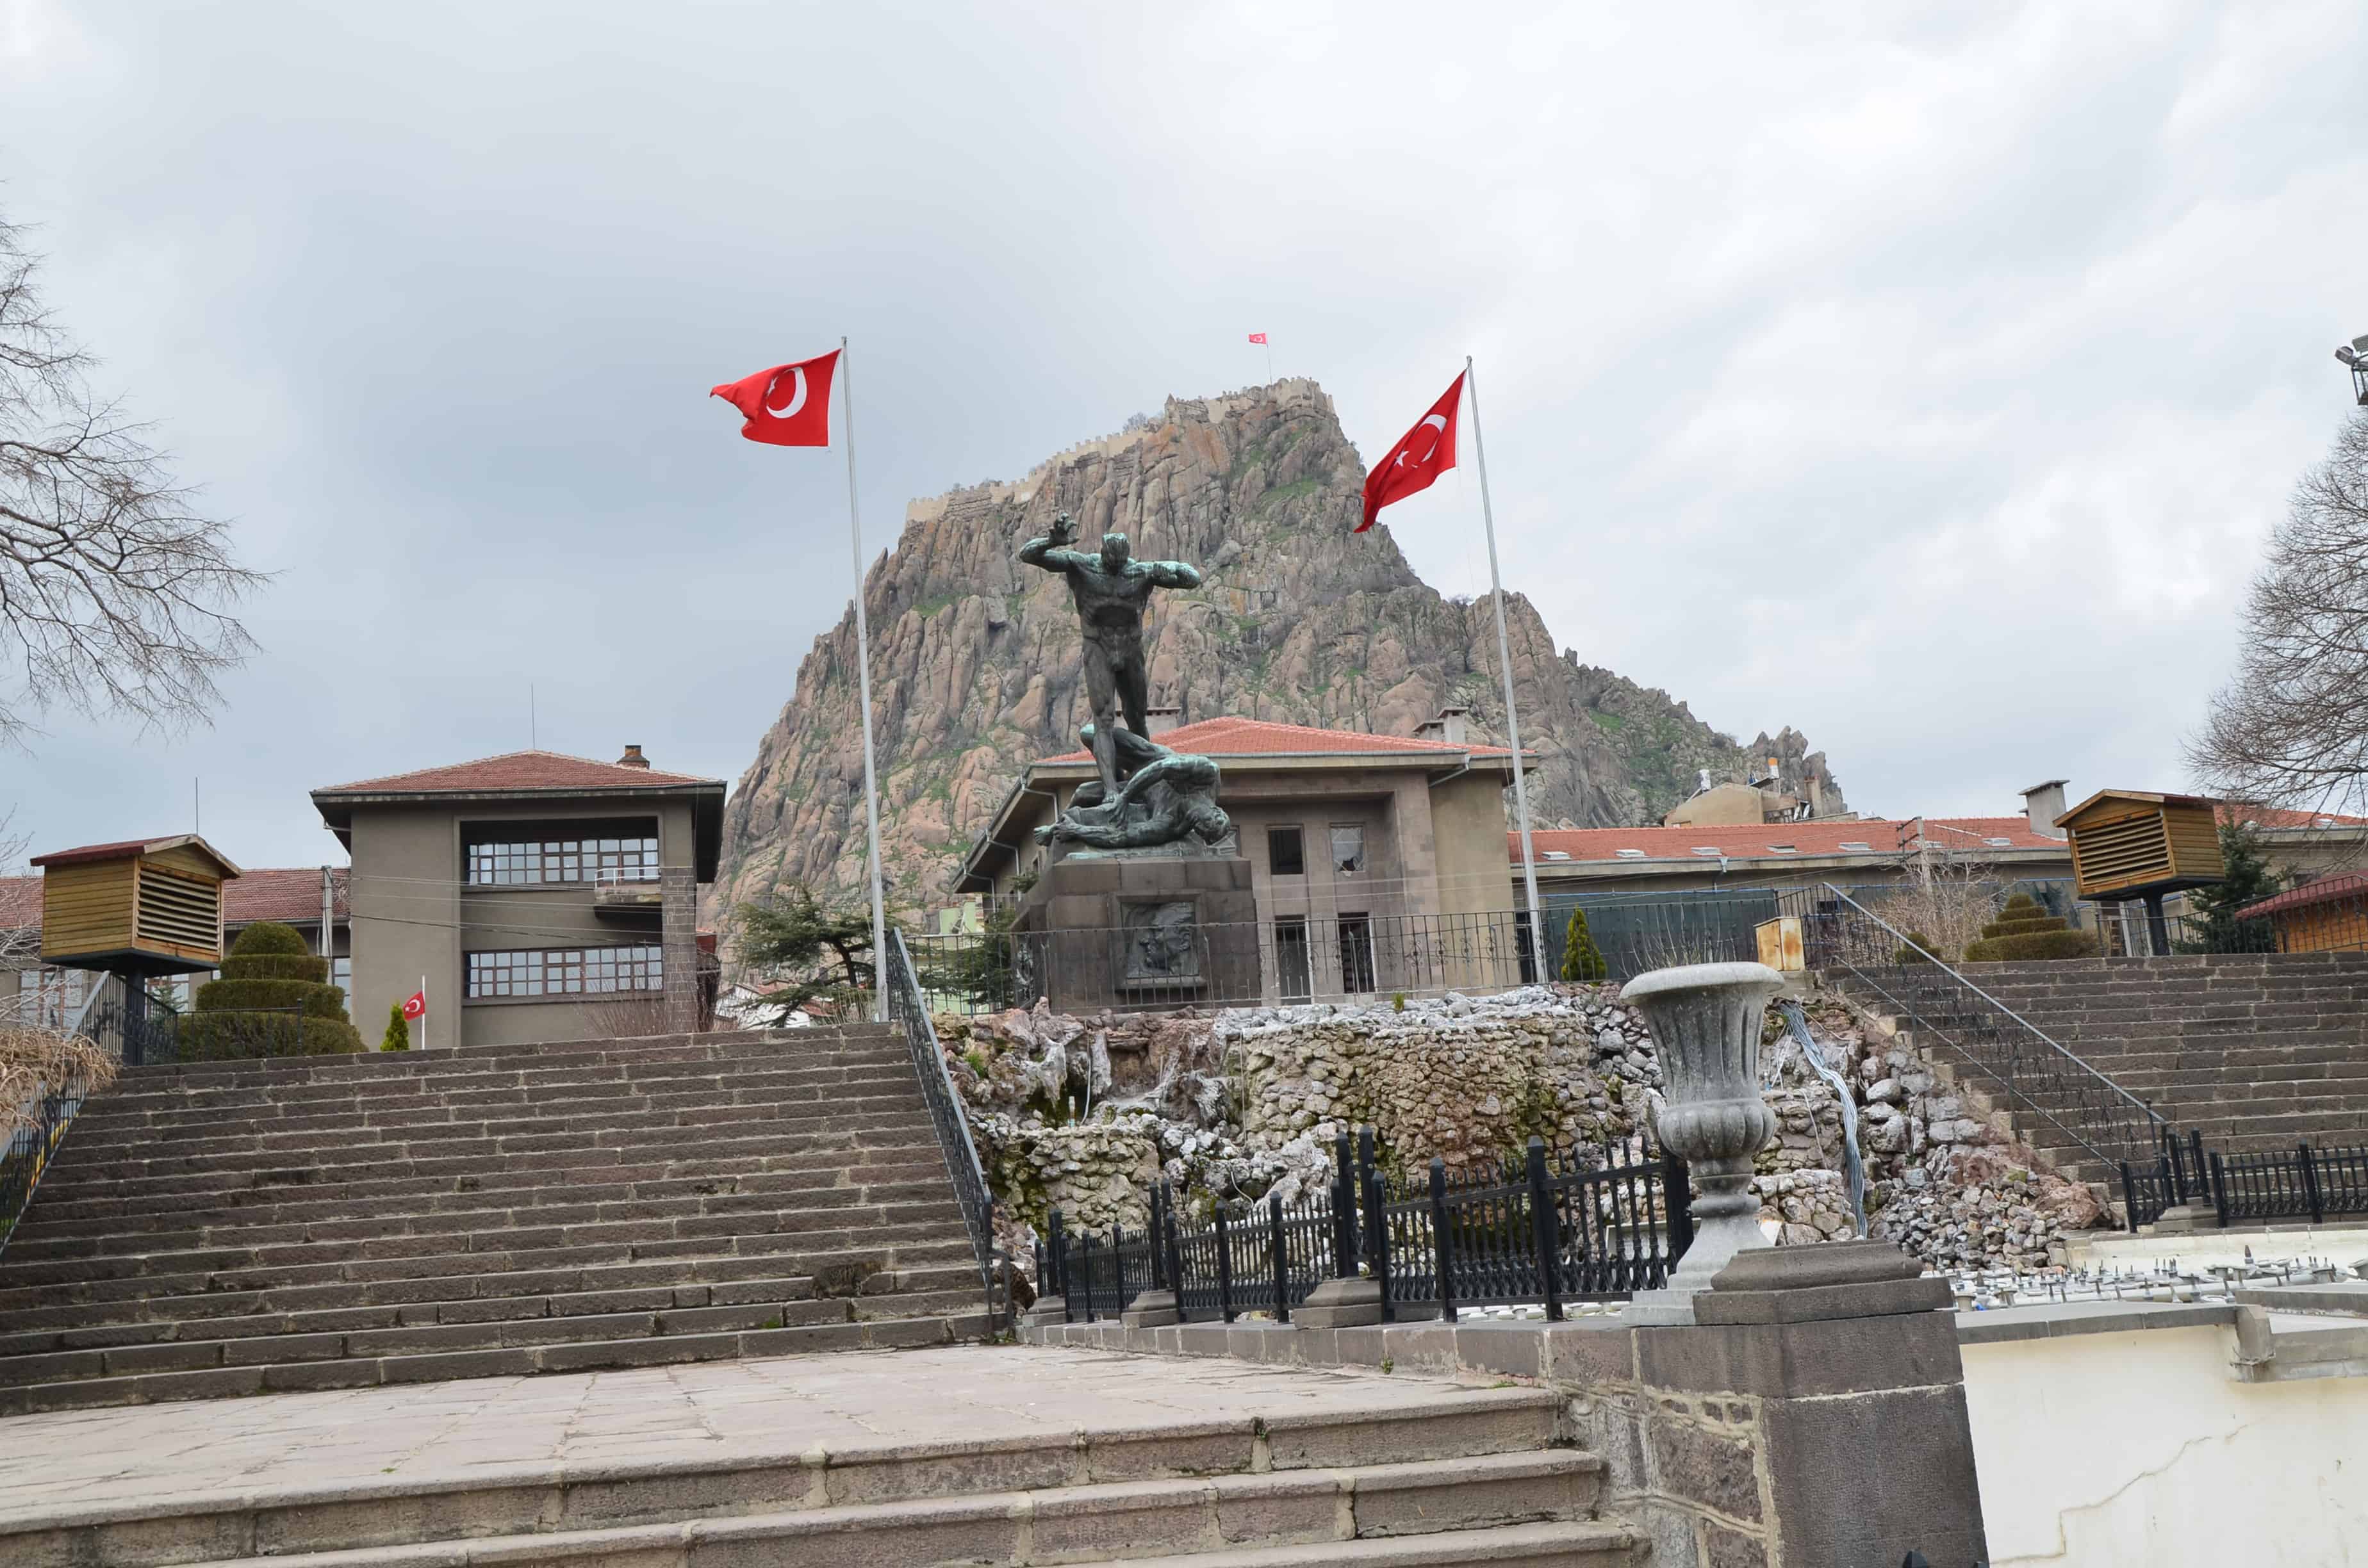 The bottom of Victory Square in Afyon, Turkey